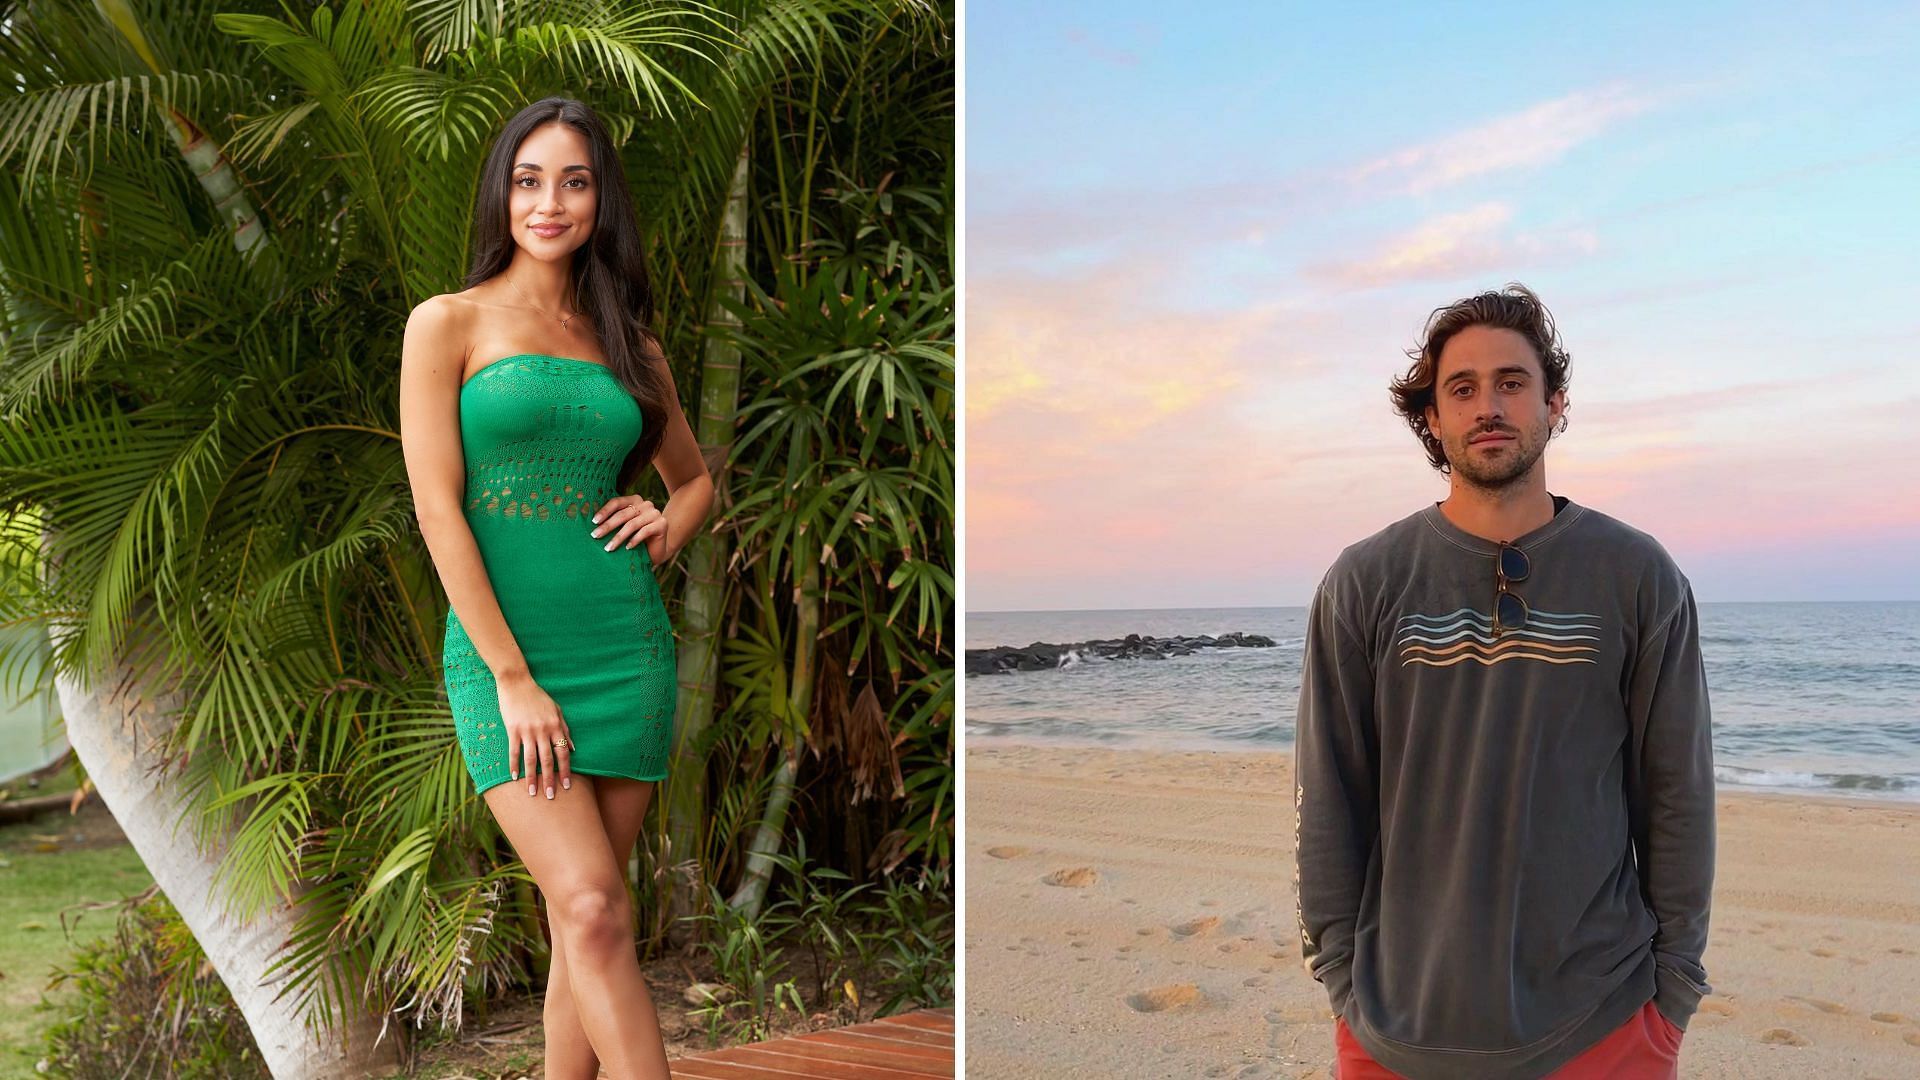 Its slimy Fans react as Victoria confirms her relationship with Greg  Grippo on Bachelor in Paradise reunion